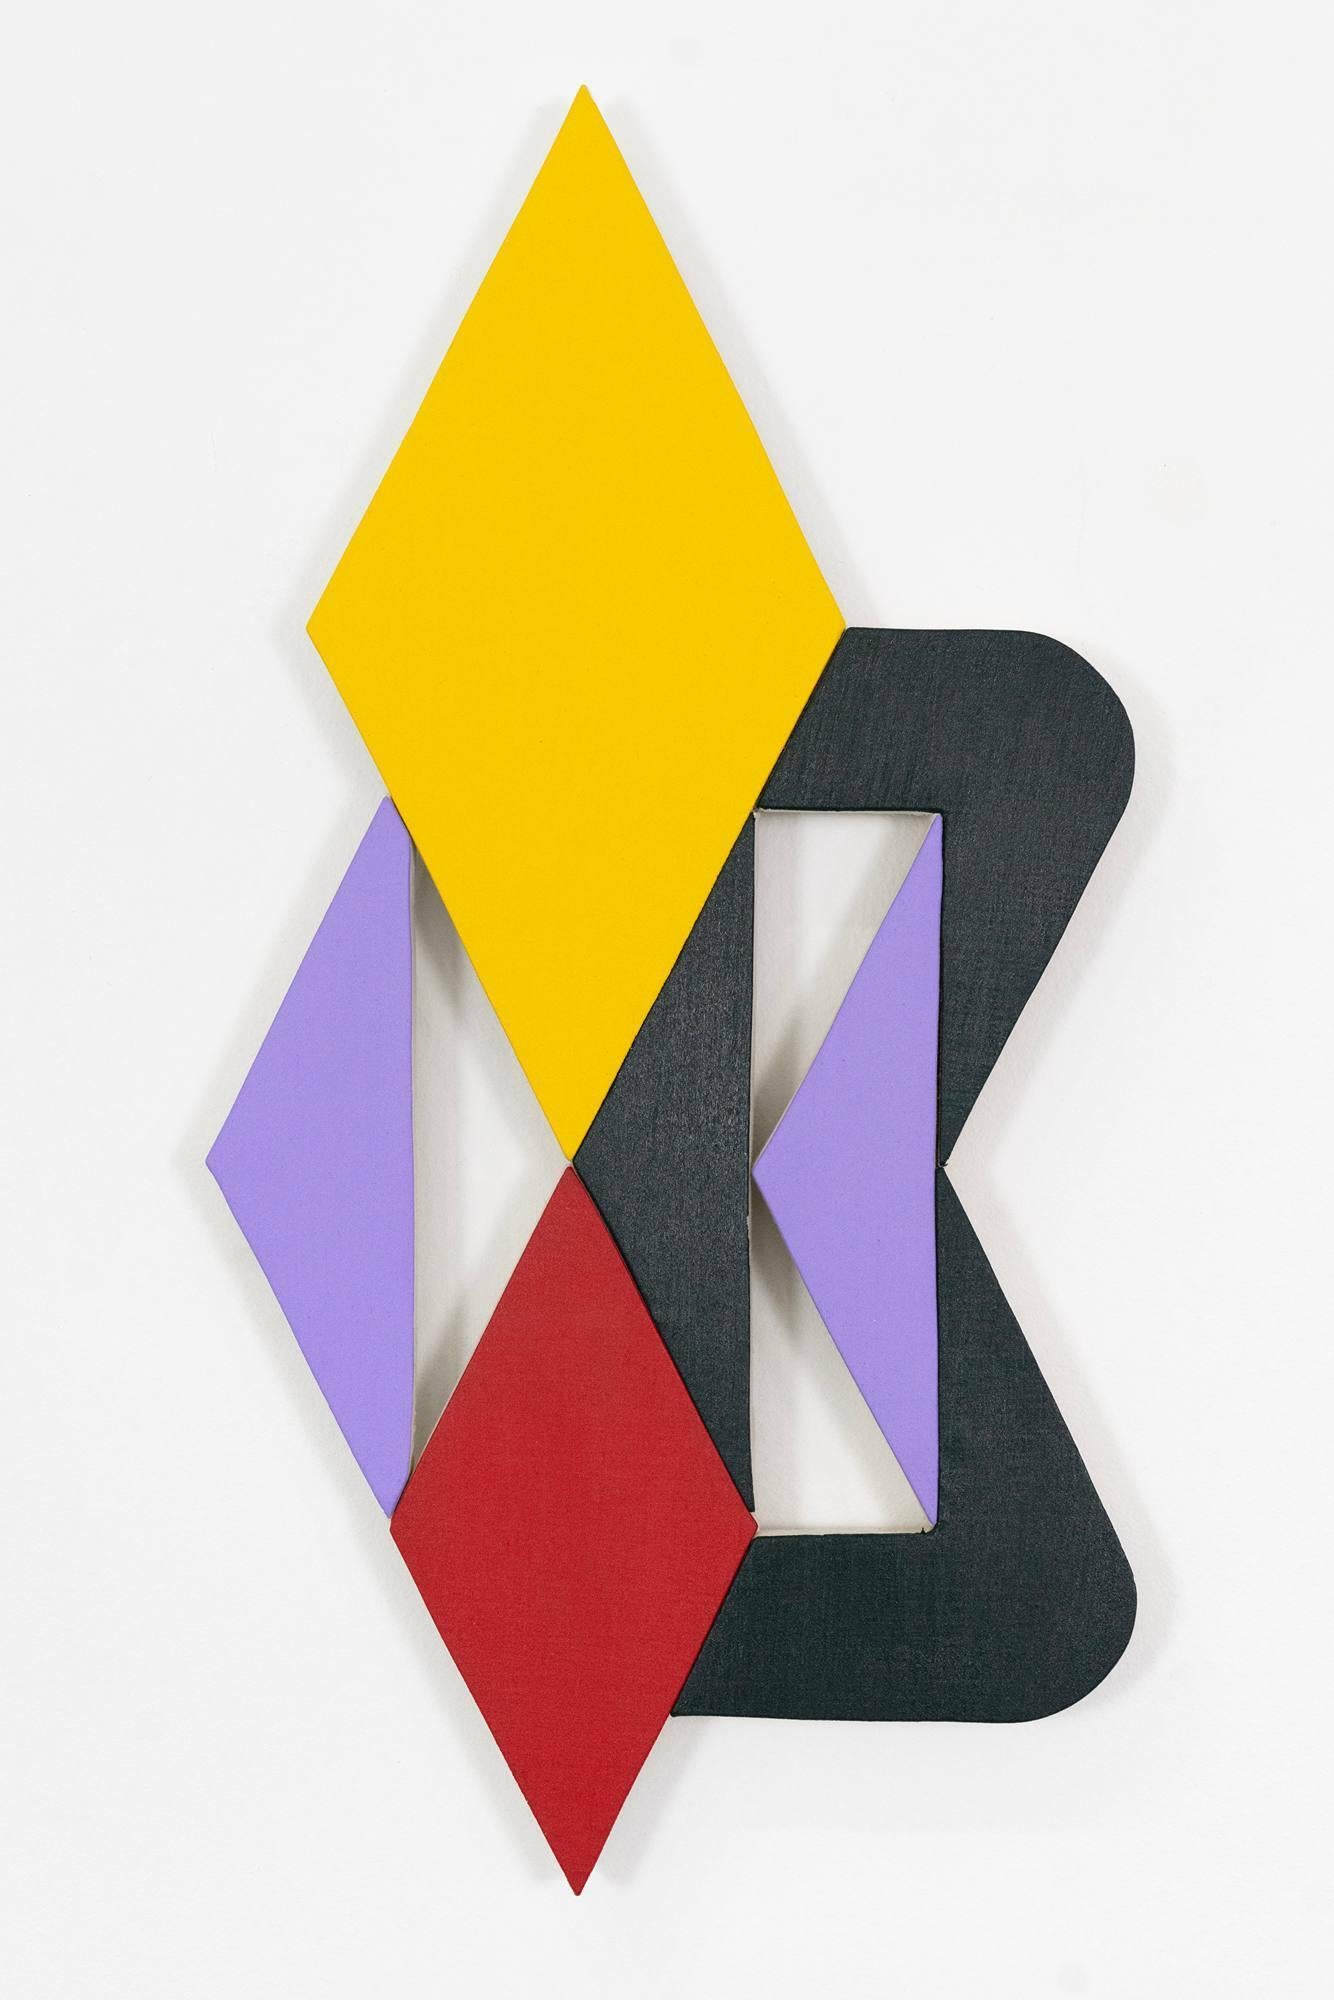 Jason Matherly Abstract Sculpture - "22-8" Mixed Media Wall Sculpture painting- yellow, purple, red, black